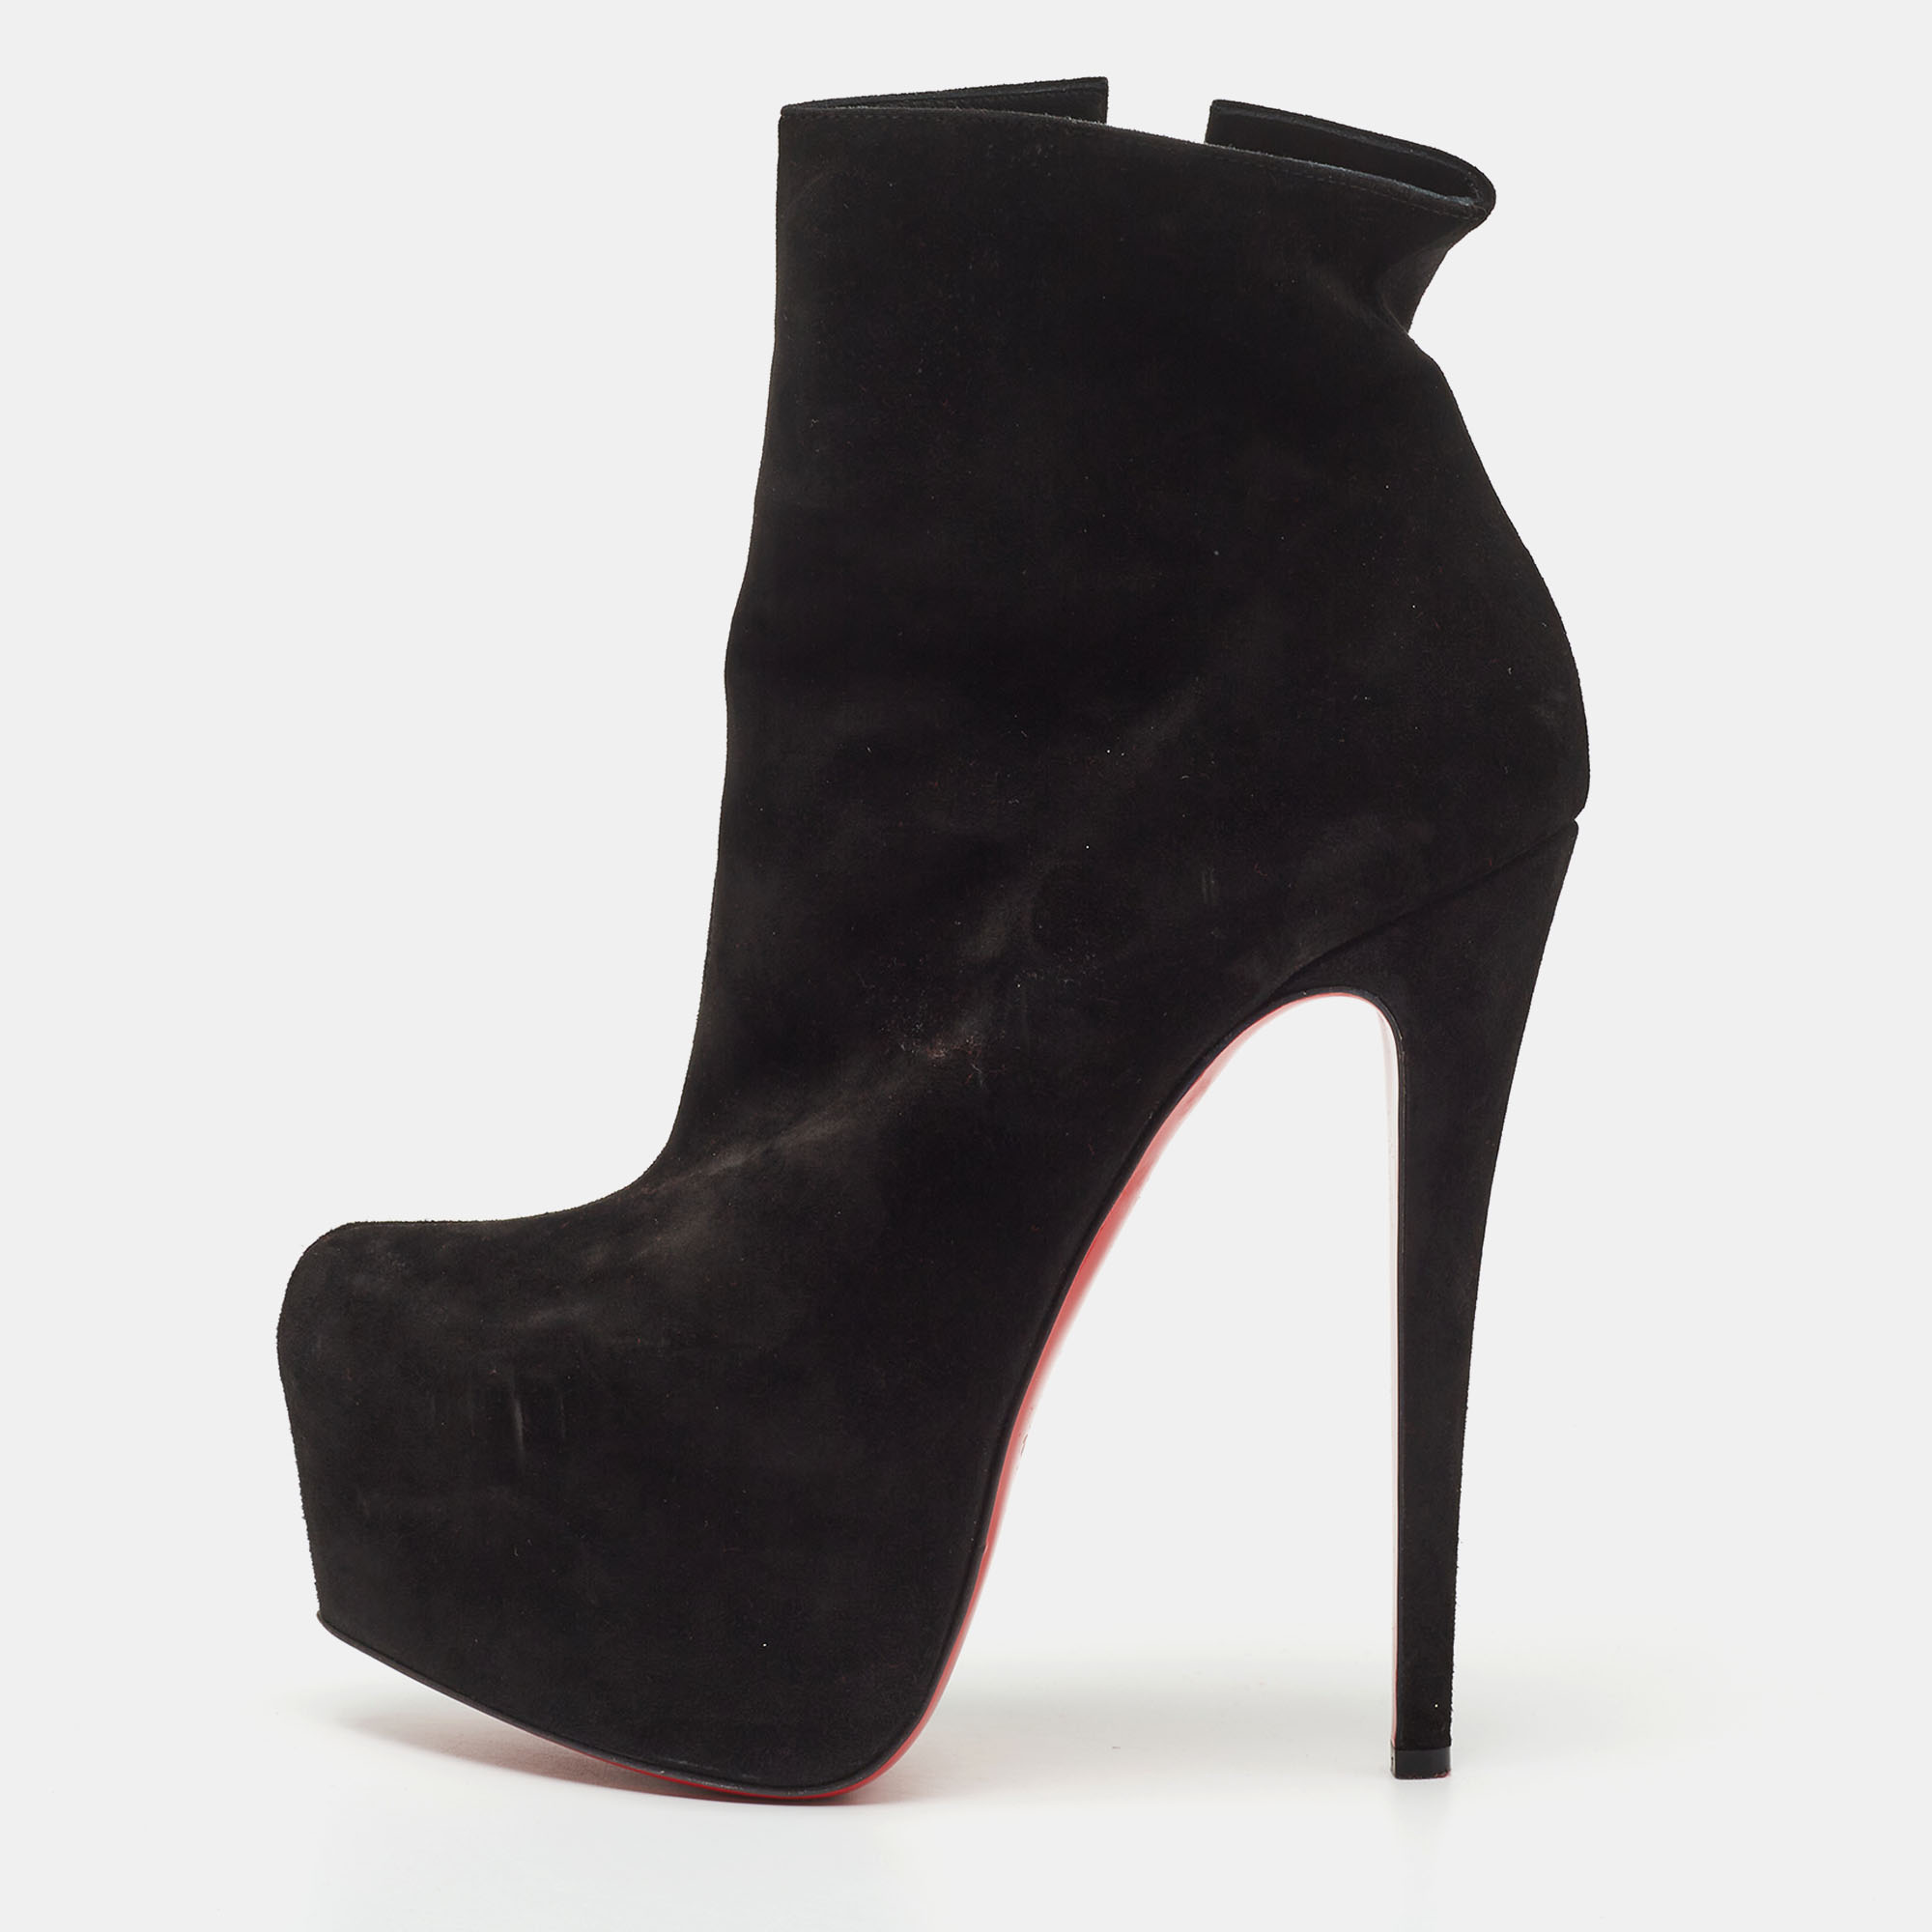 Pre-owned Christian Louboutin Black Suede Platform Ankle Length Boots Size 38